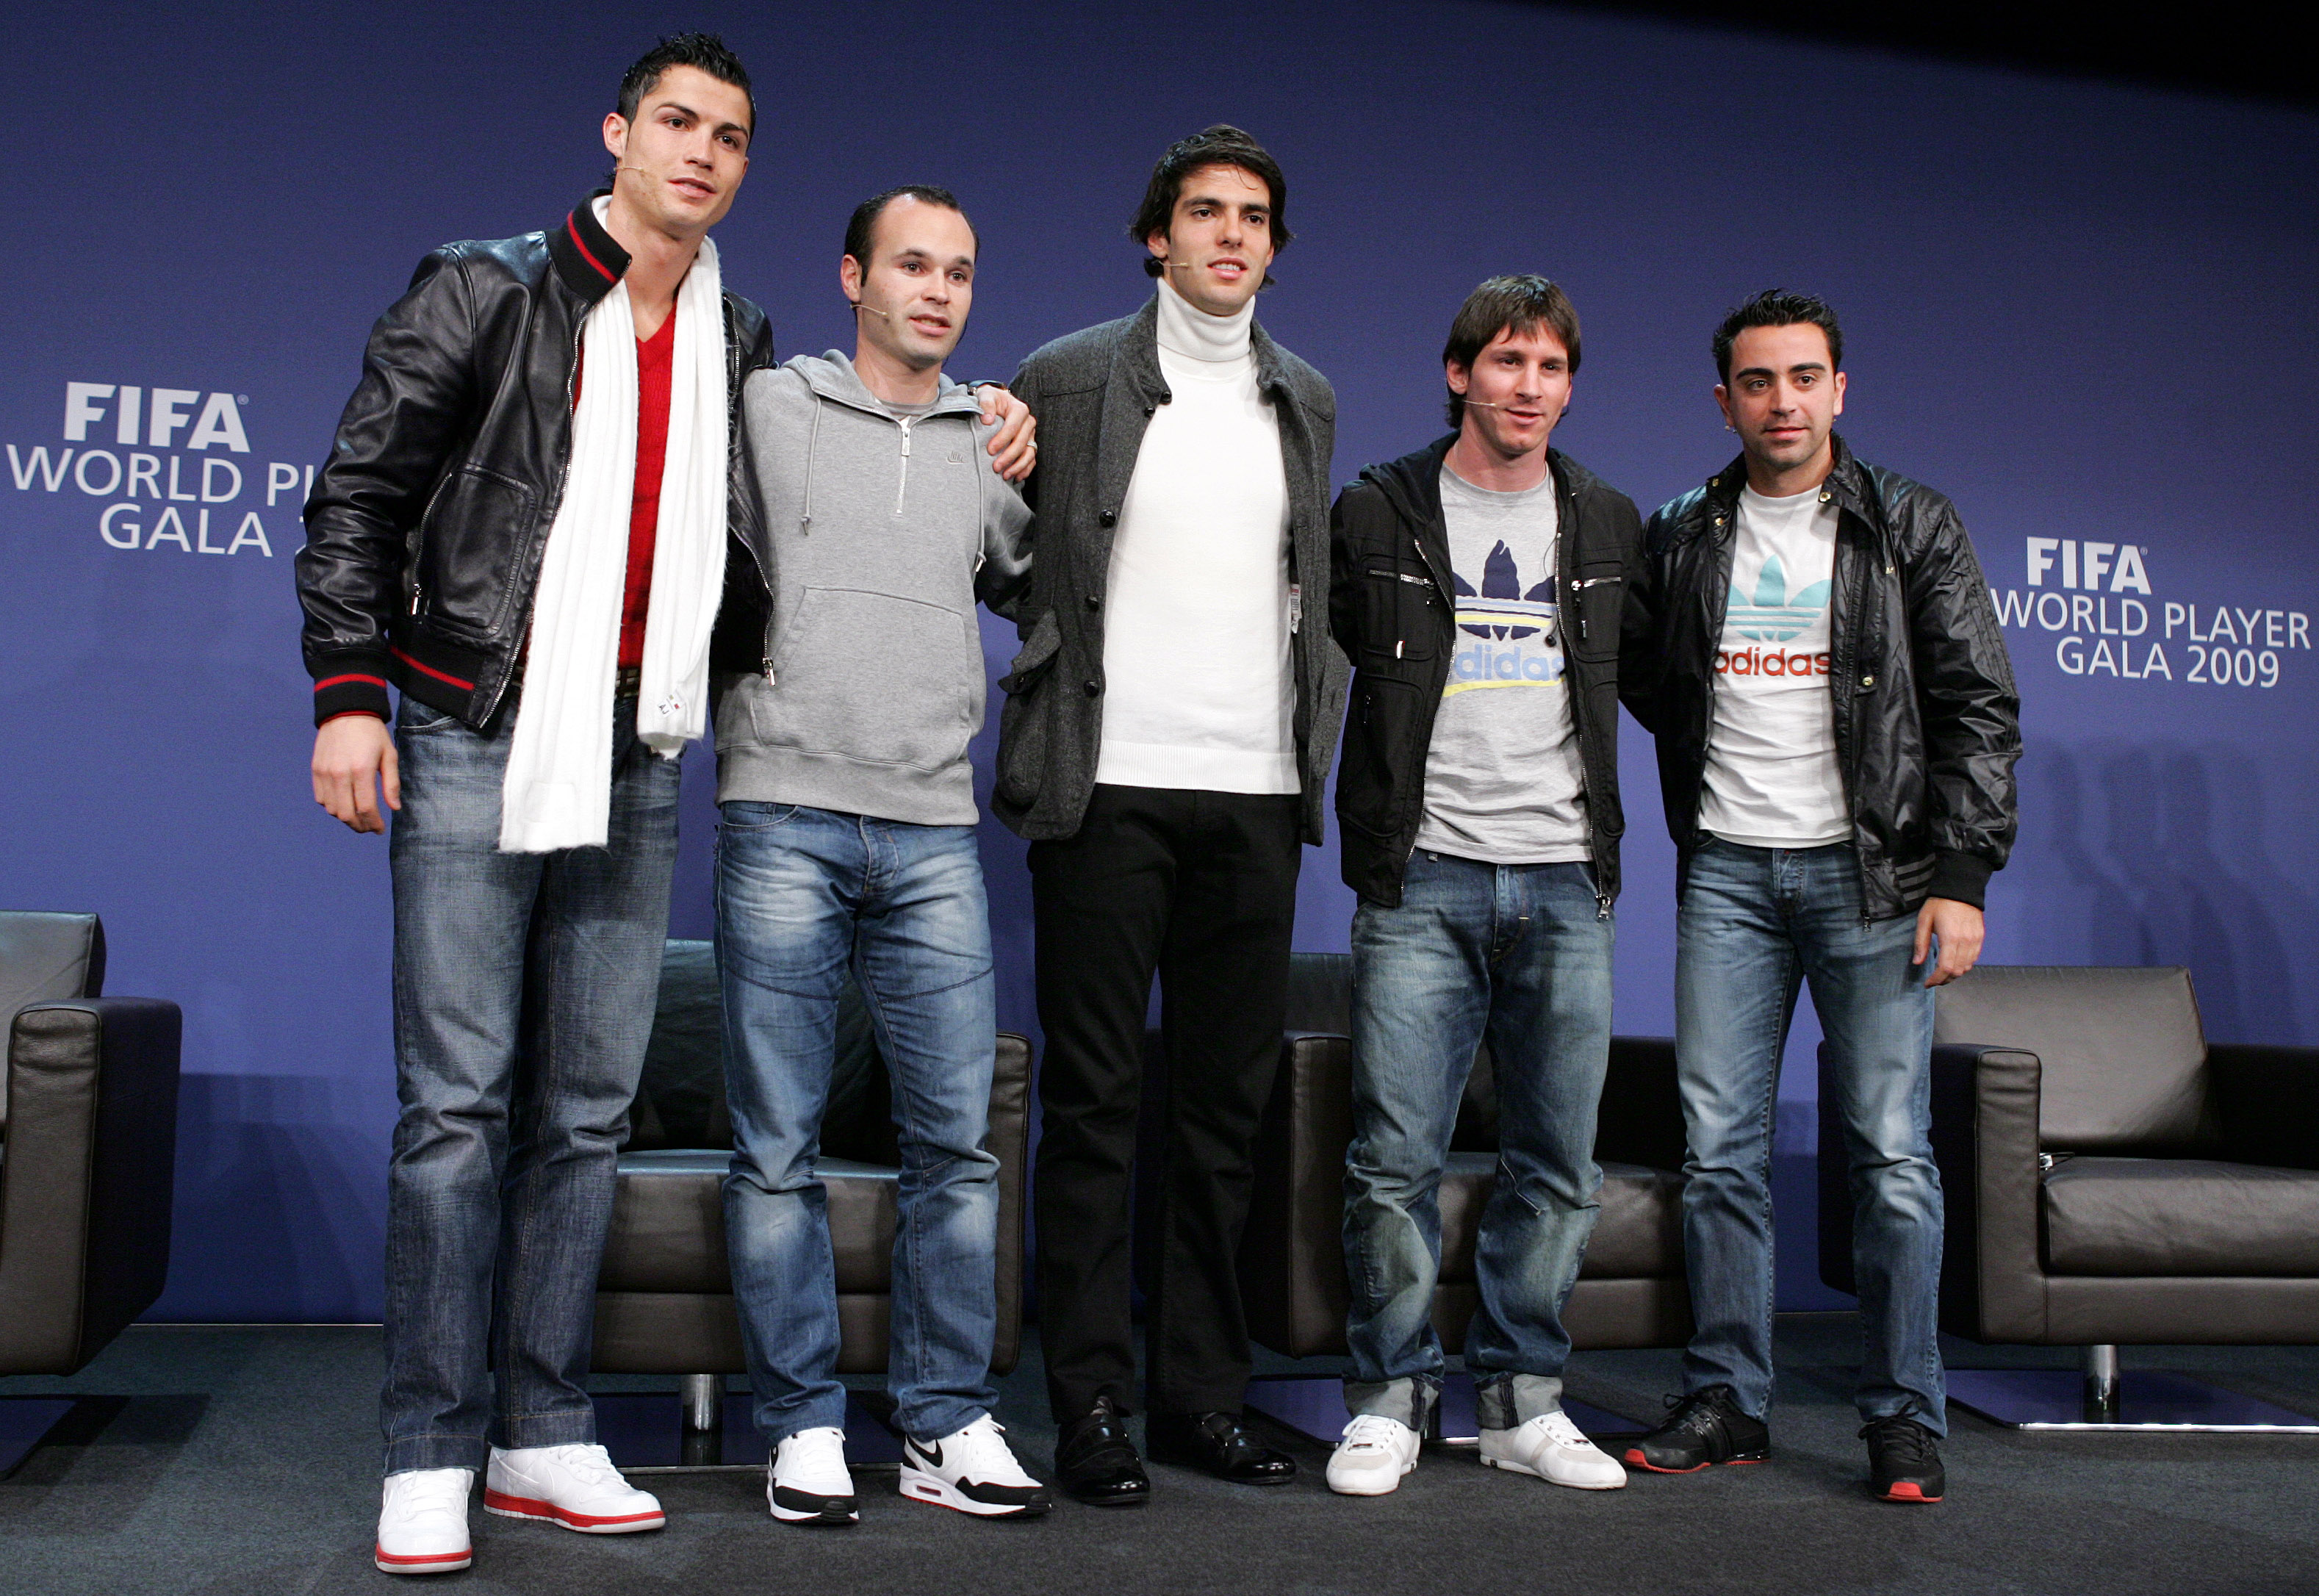 ZURICH - SWITZERLAND - DECEMBER 21:  (L-R) Portugal's Cristiano Ronaldo, Spain's Andres Iniesta, Brazil's Kaka, Argentina's Lionel Messi and Spain's Xavi Hernandez during a Press Conference for the FIFA 2009 World Player Of The Year at the Kongresshaus on